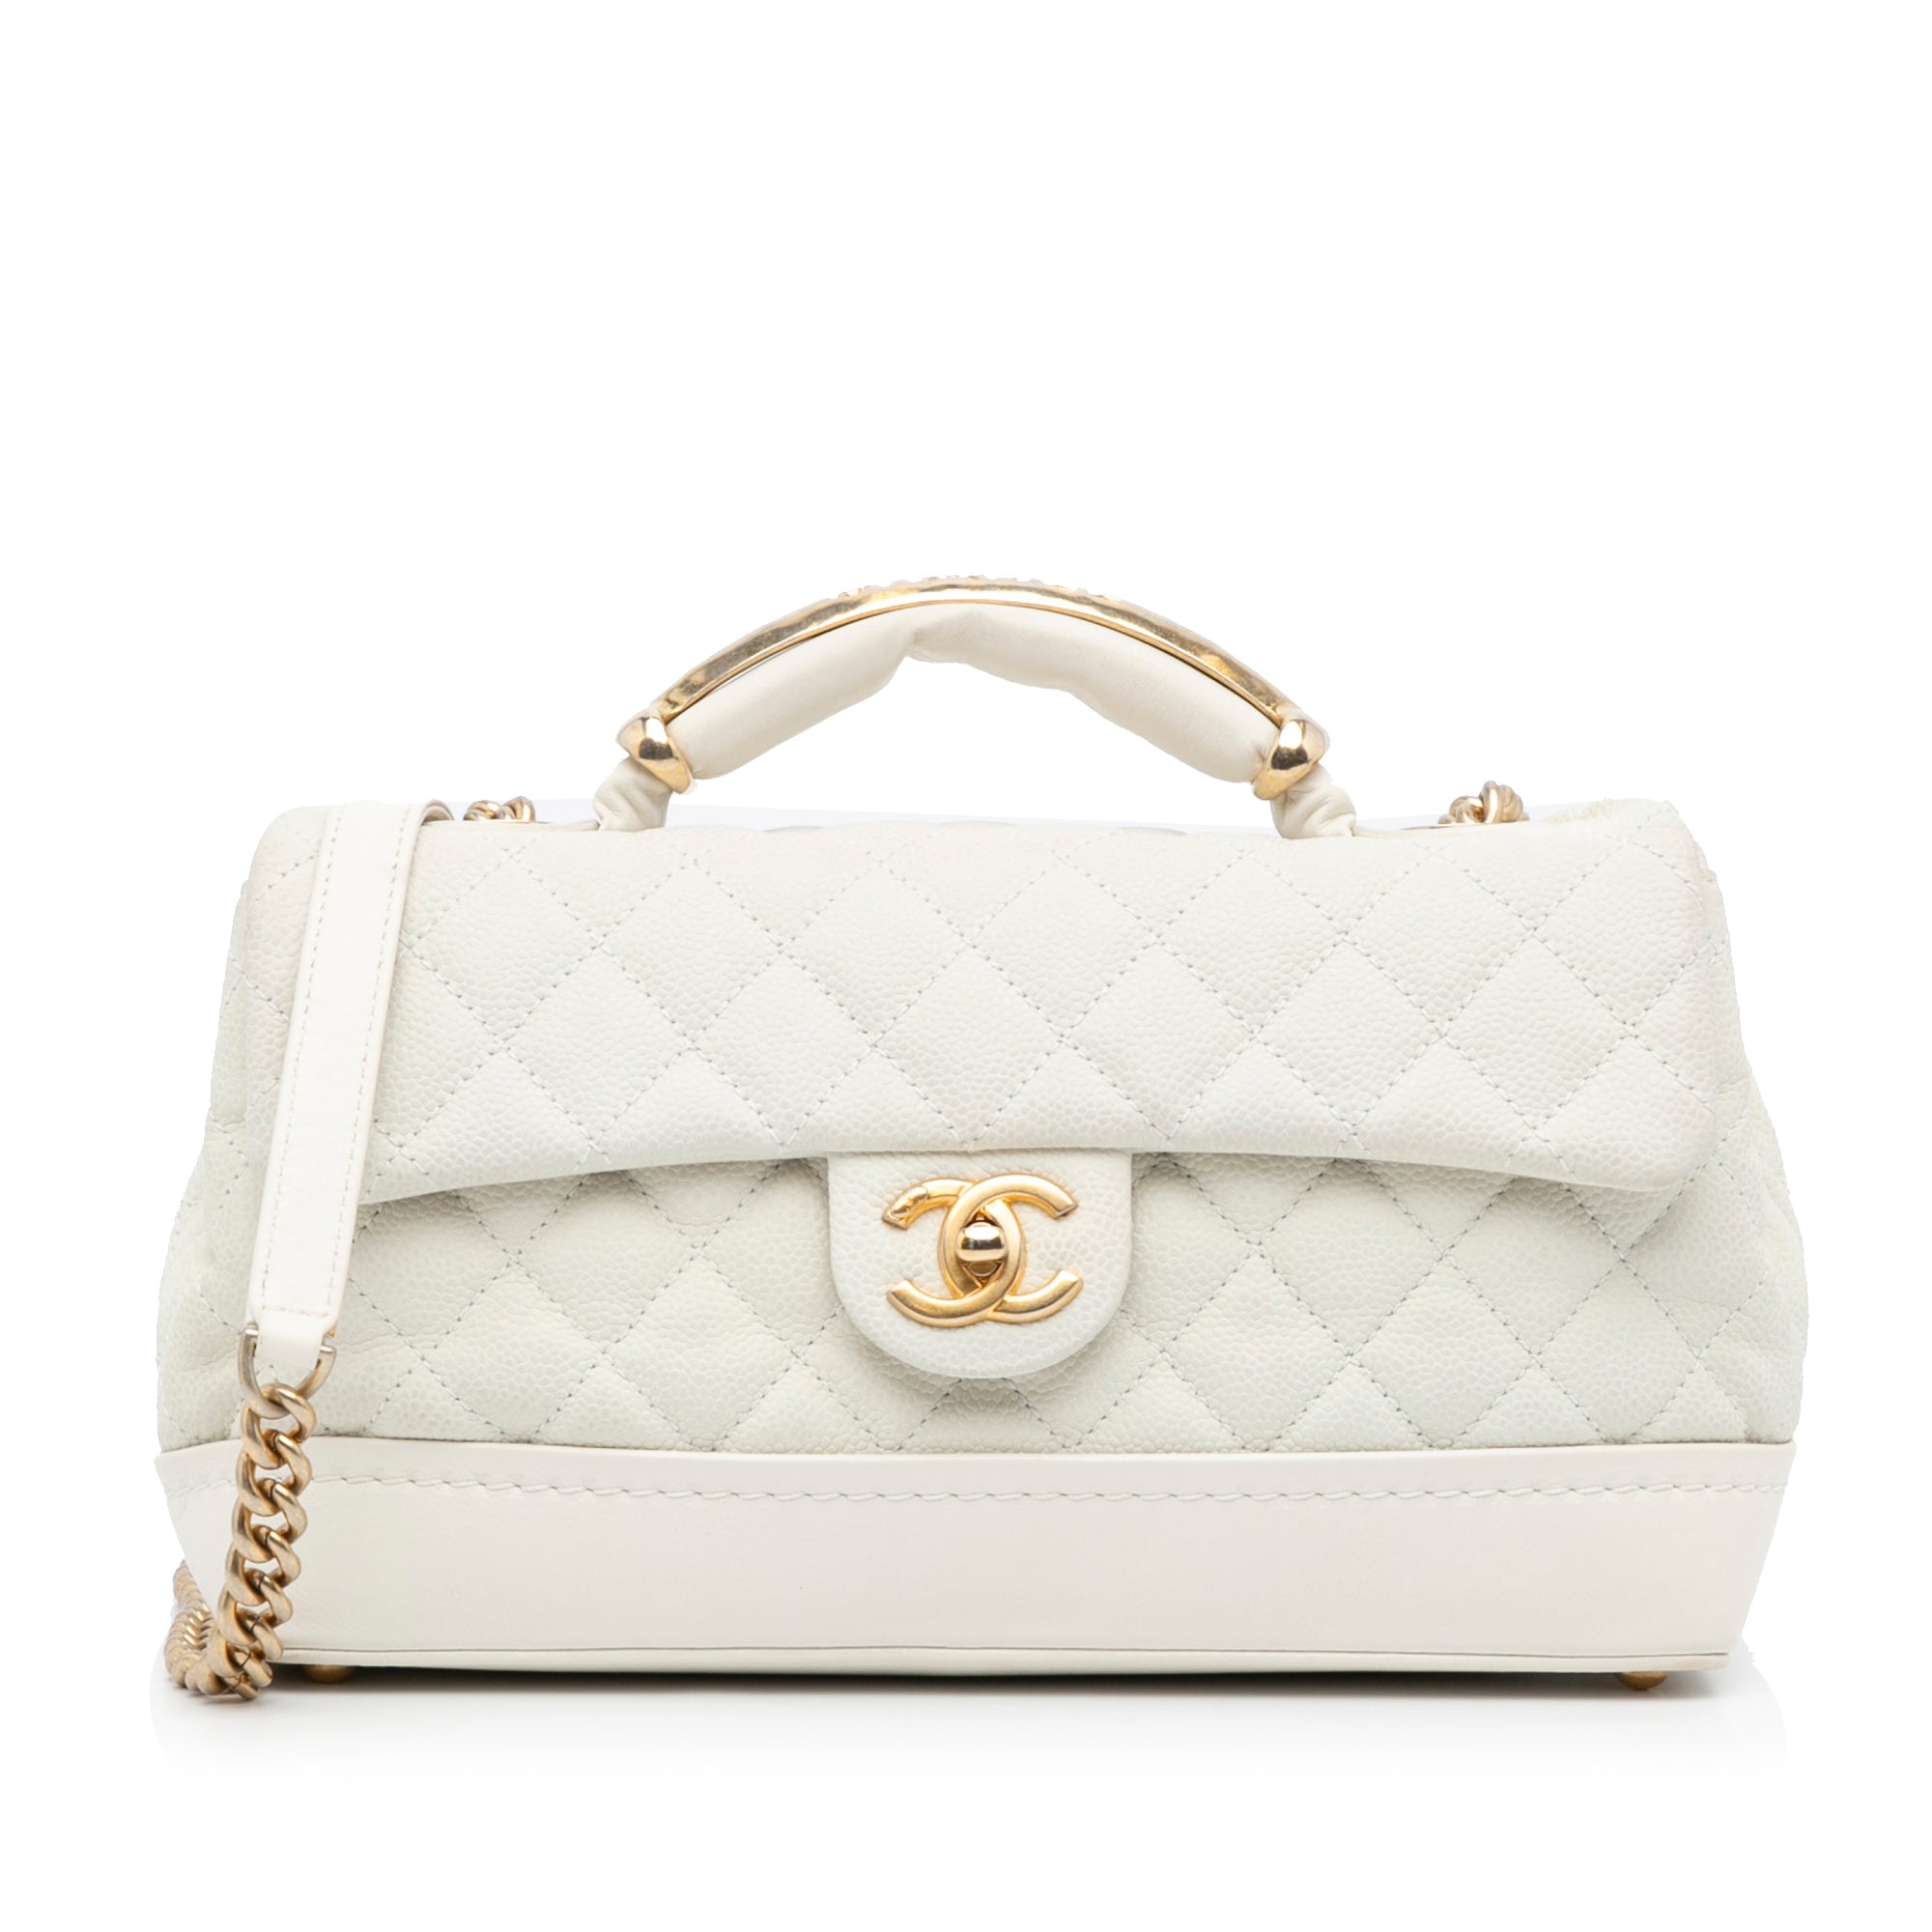 Chanel Handbags Are Discounted In The Farfetch Cyber Monday Sale